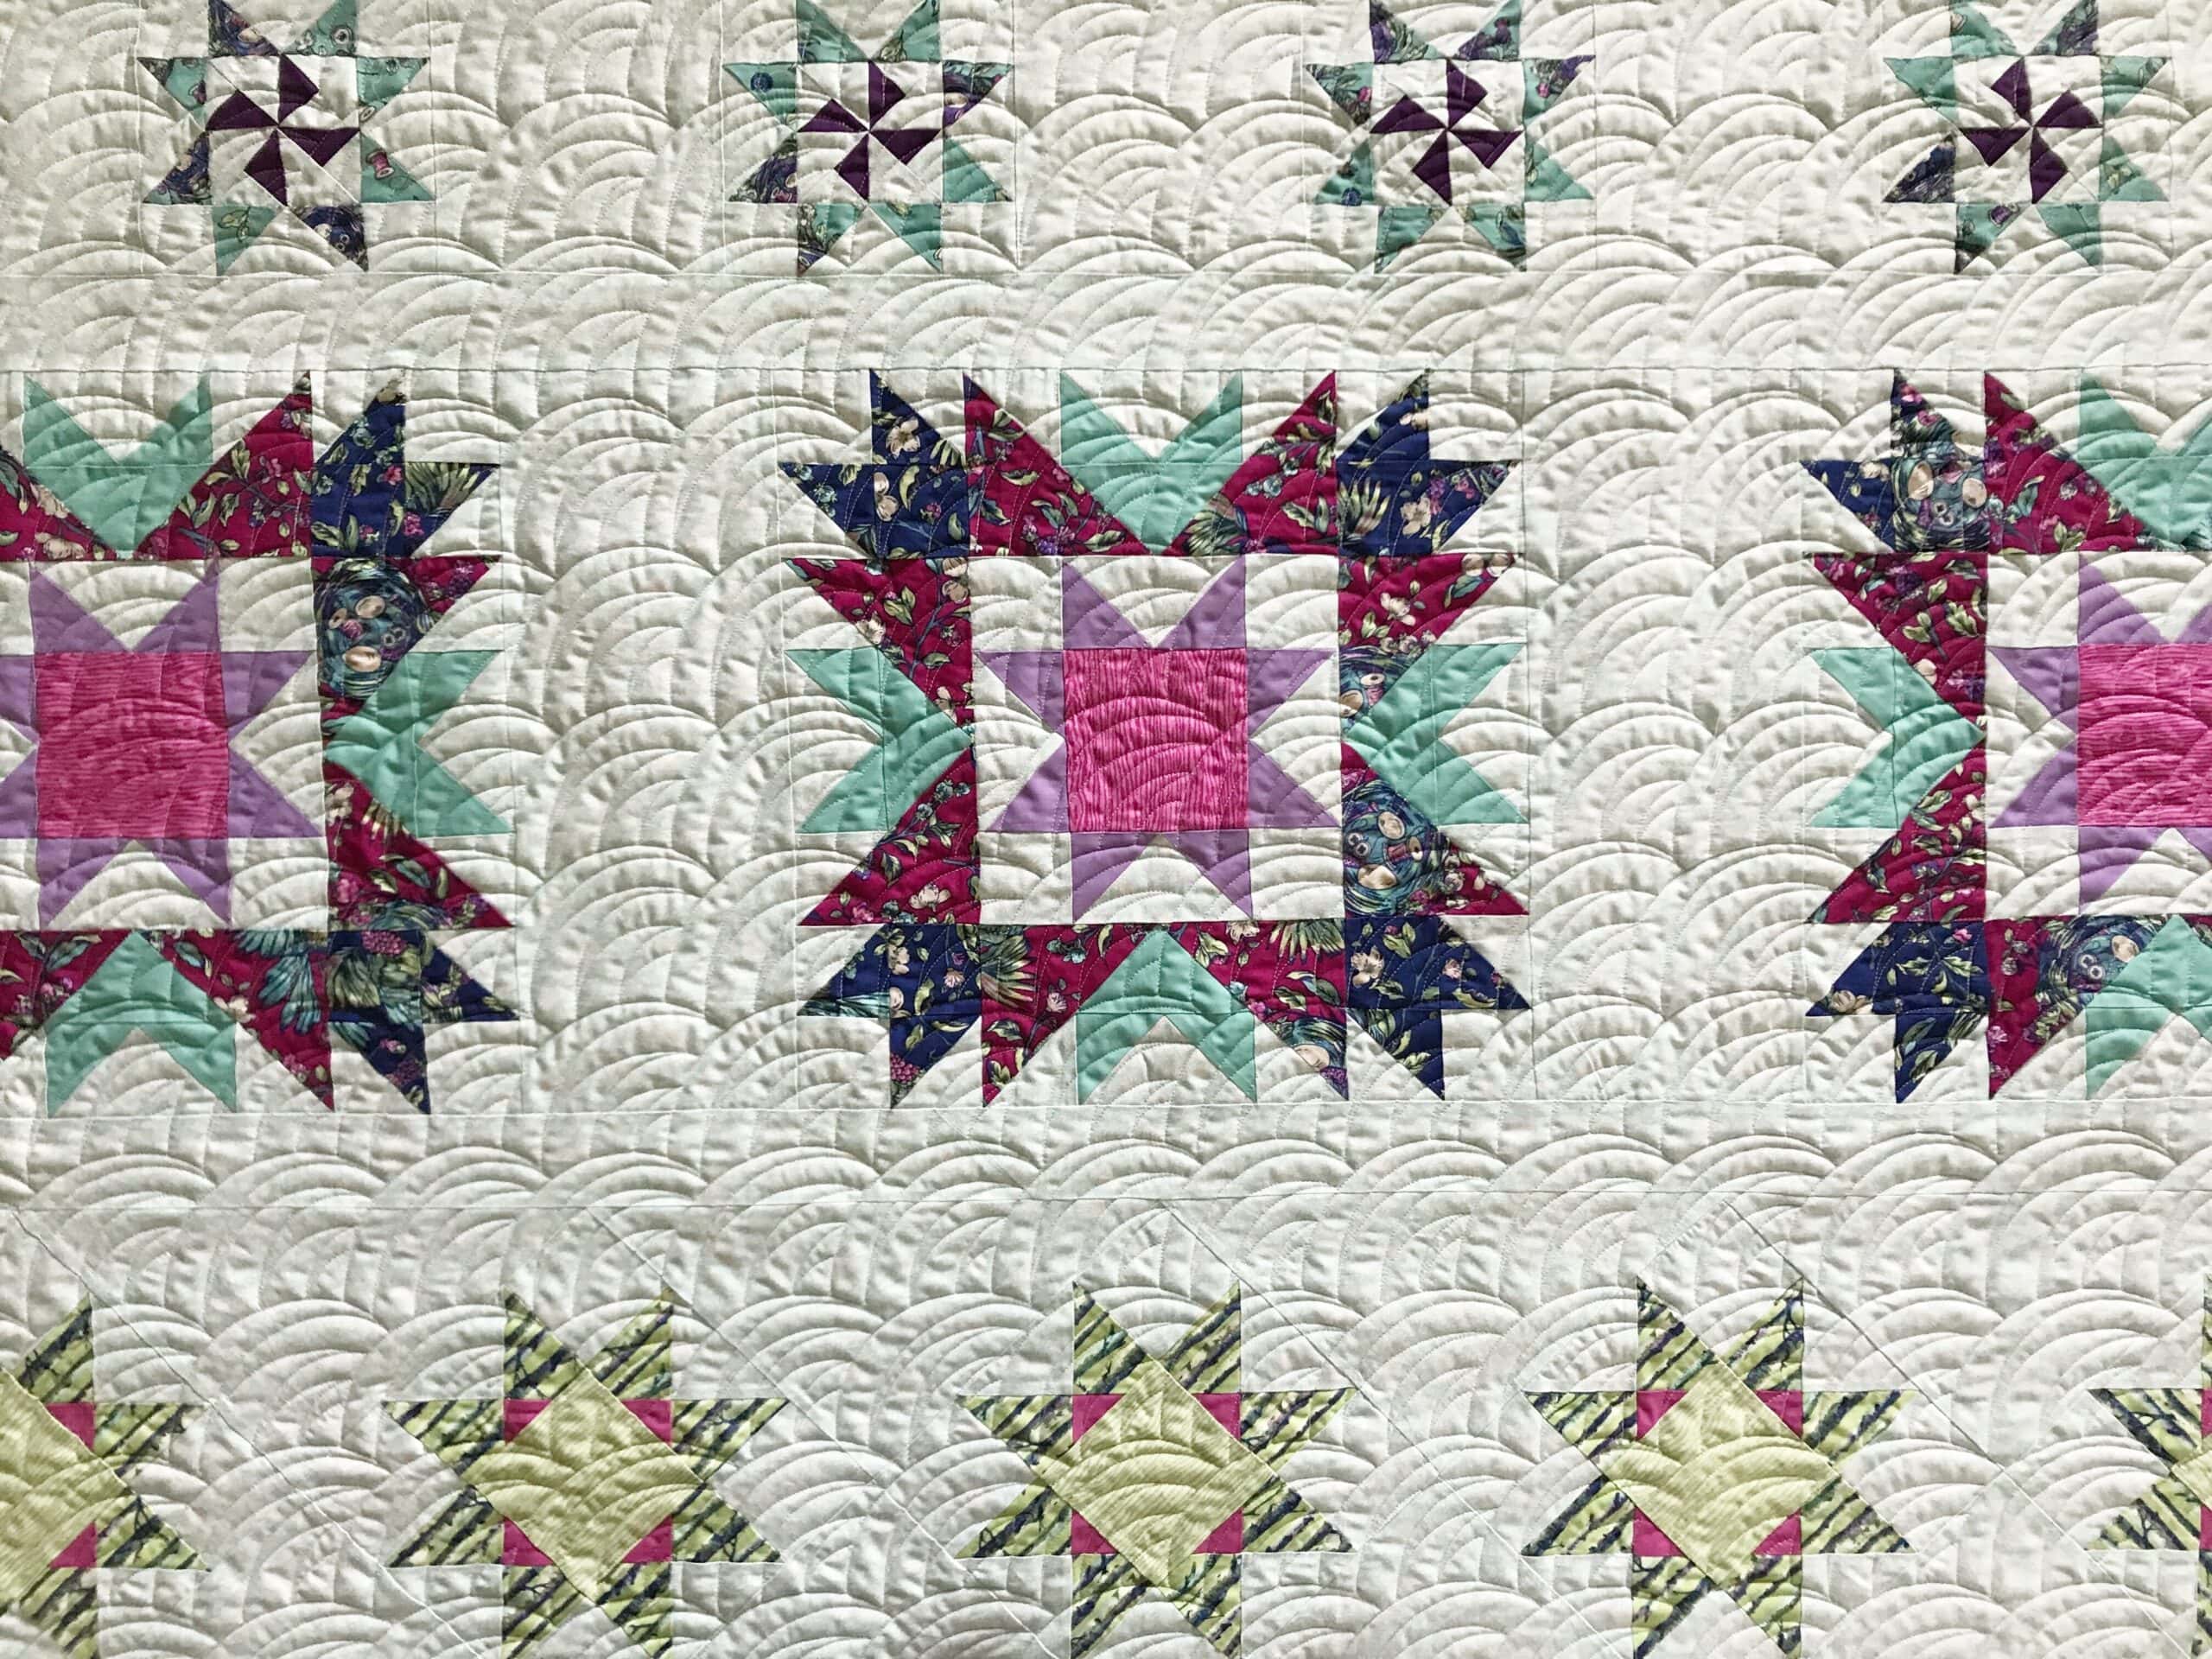 Starburst Quilt with Baptist-ish row-based fans